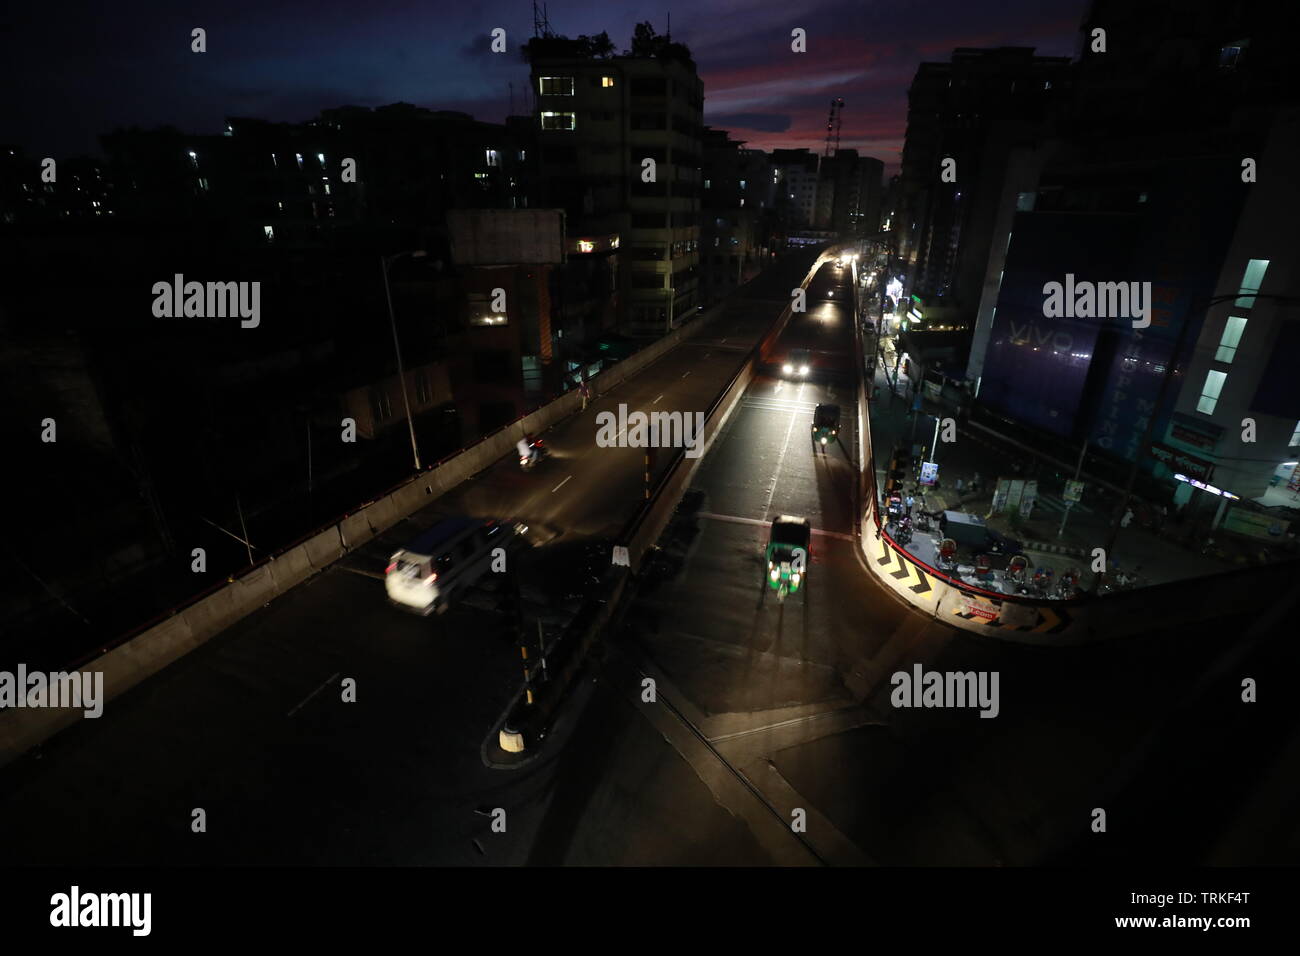 Dhaka, Bangladesh - June 07, 2019: Traffic is thin on Dhaka’s usually busy moghbazar mouchak flyover as many Dhaka residents have gone home to spend t Stock Photo